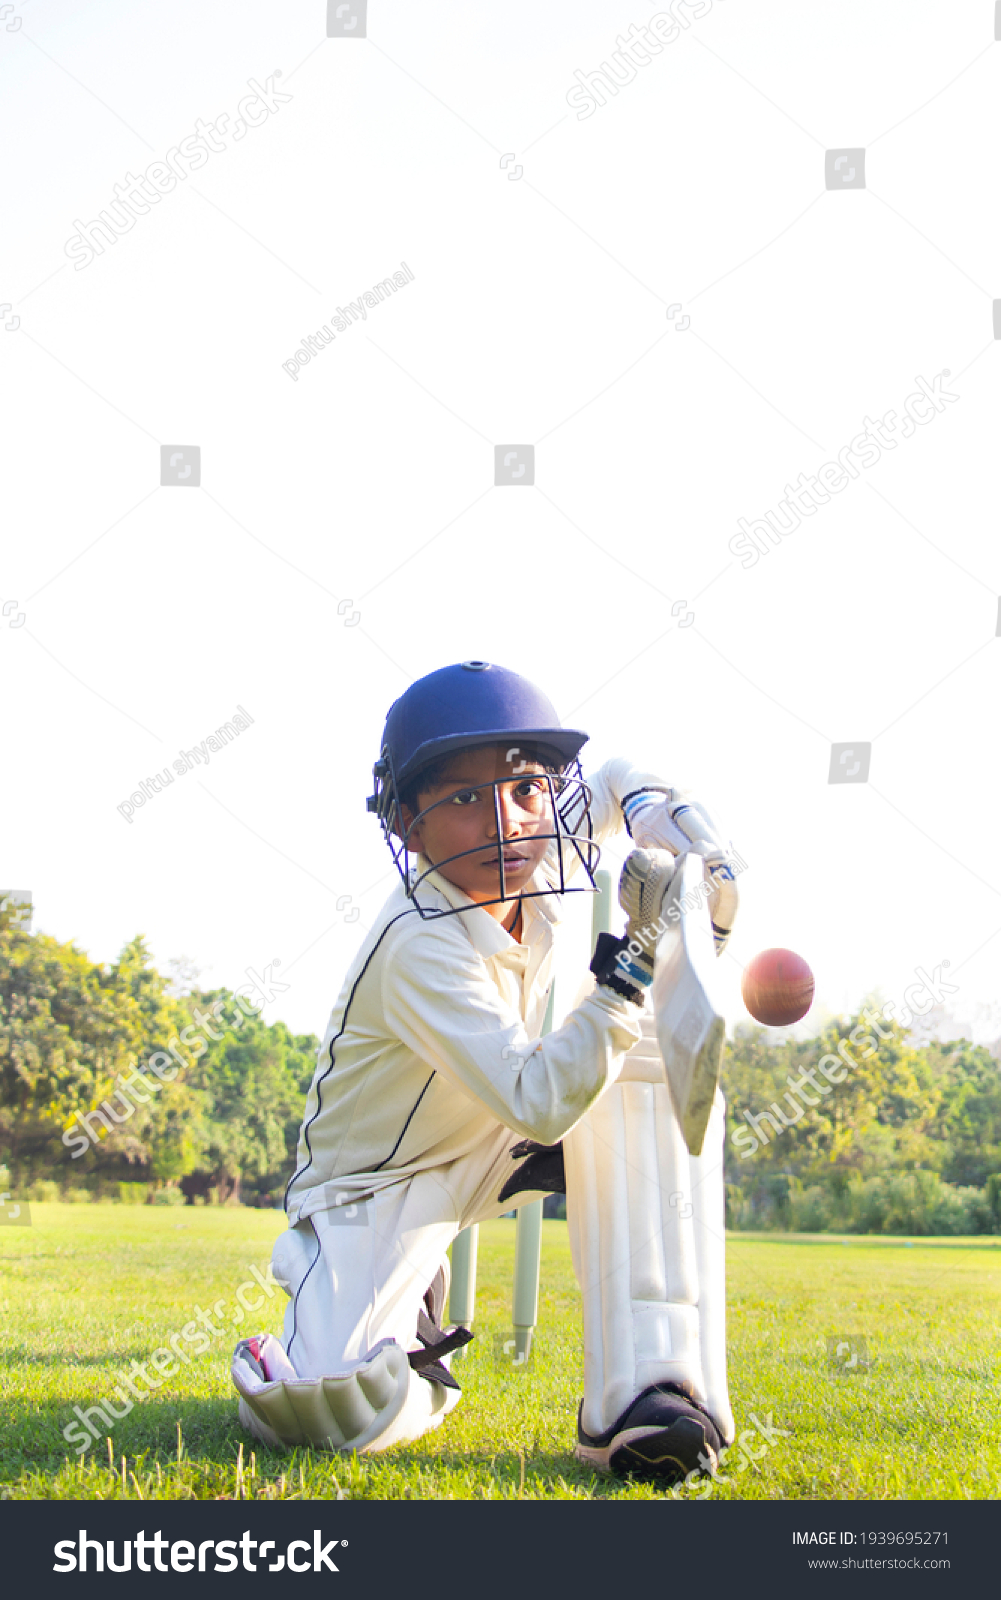 Young boy batting in protective gear during a cricket #1939695271